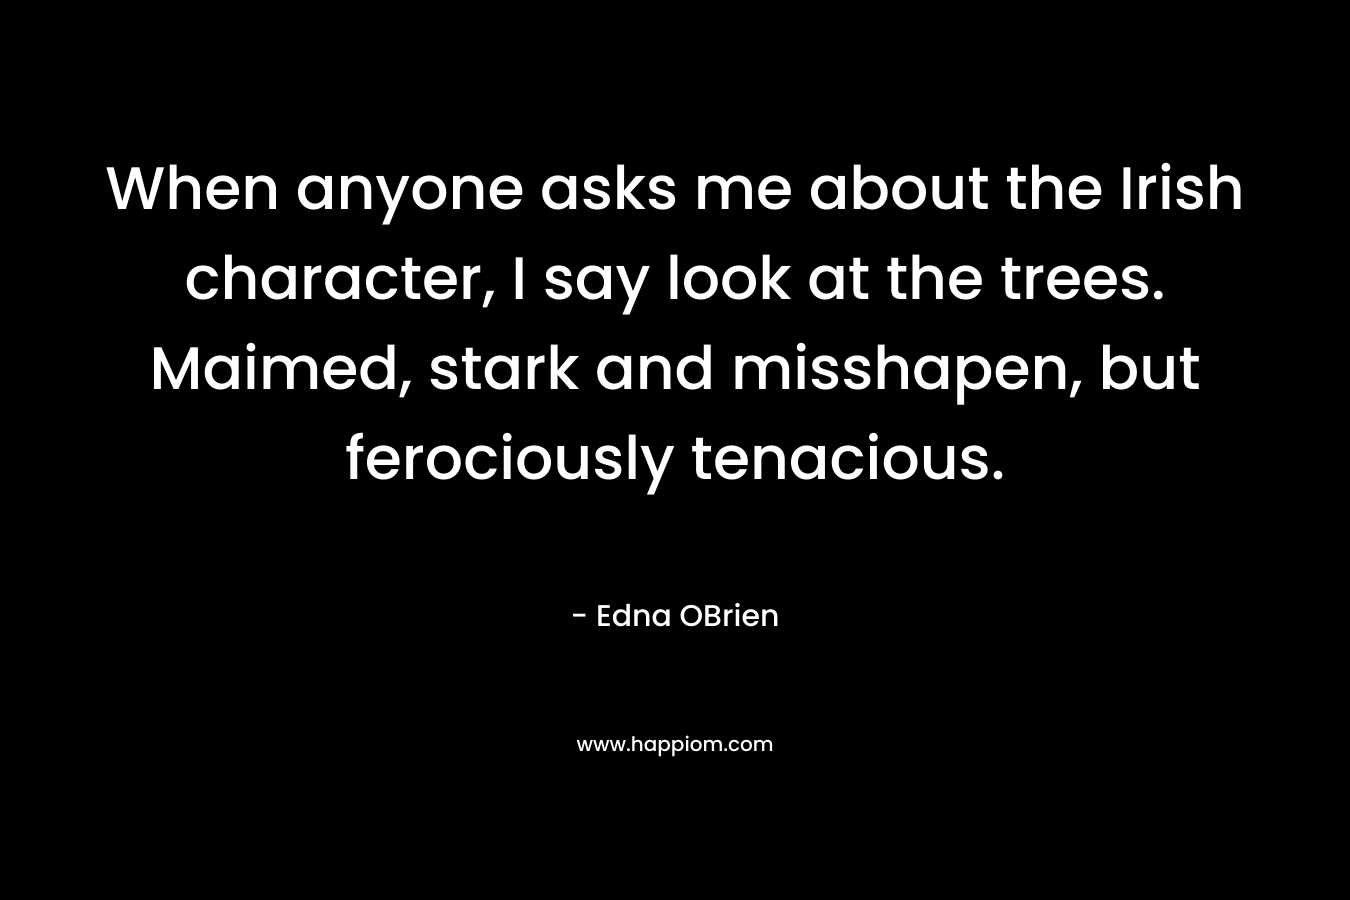 When anyone asks me about the Irish character, I say look at the trees. Maimed, stark and misshapen, but ferociously tenacious. – Edna OBrien